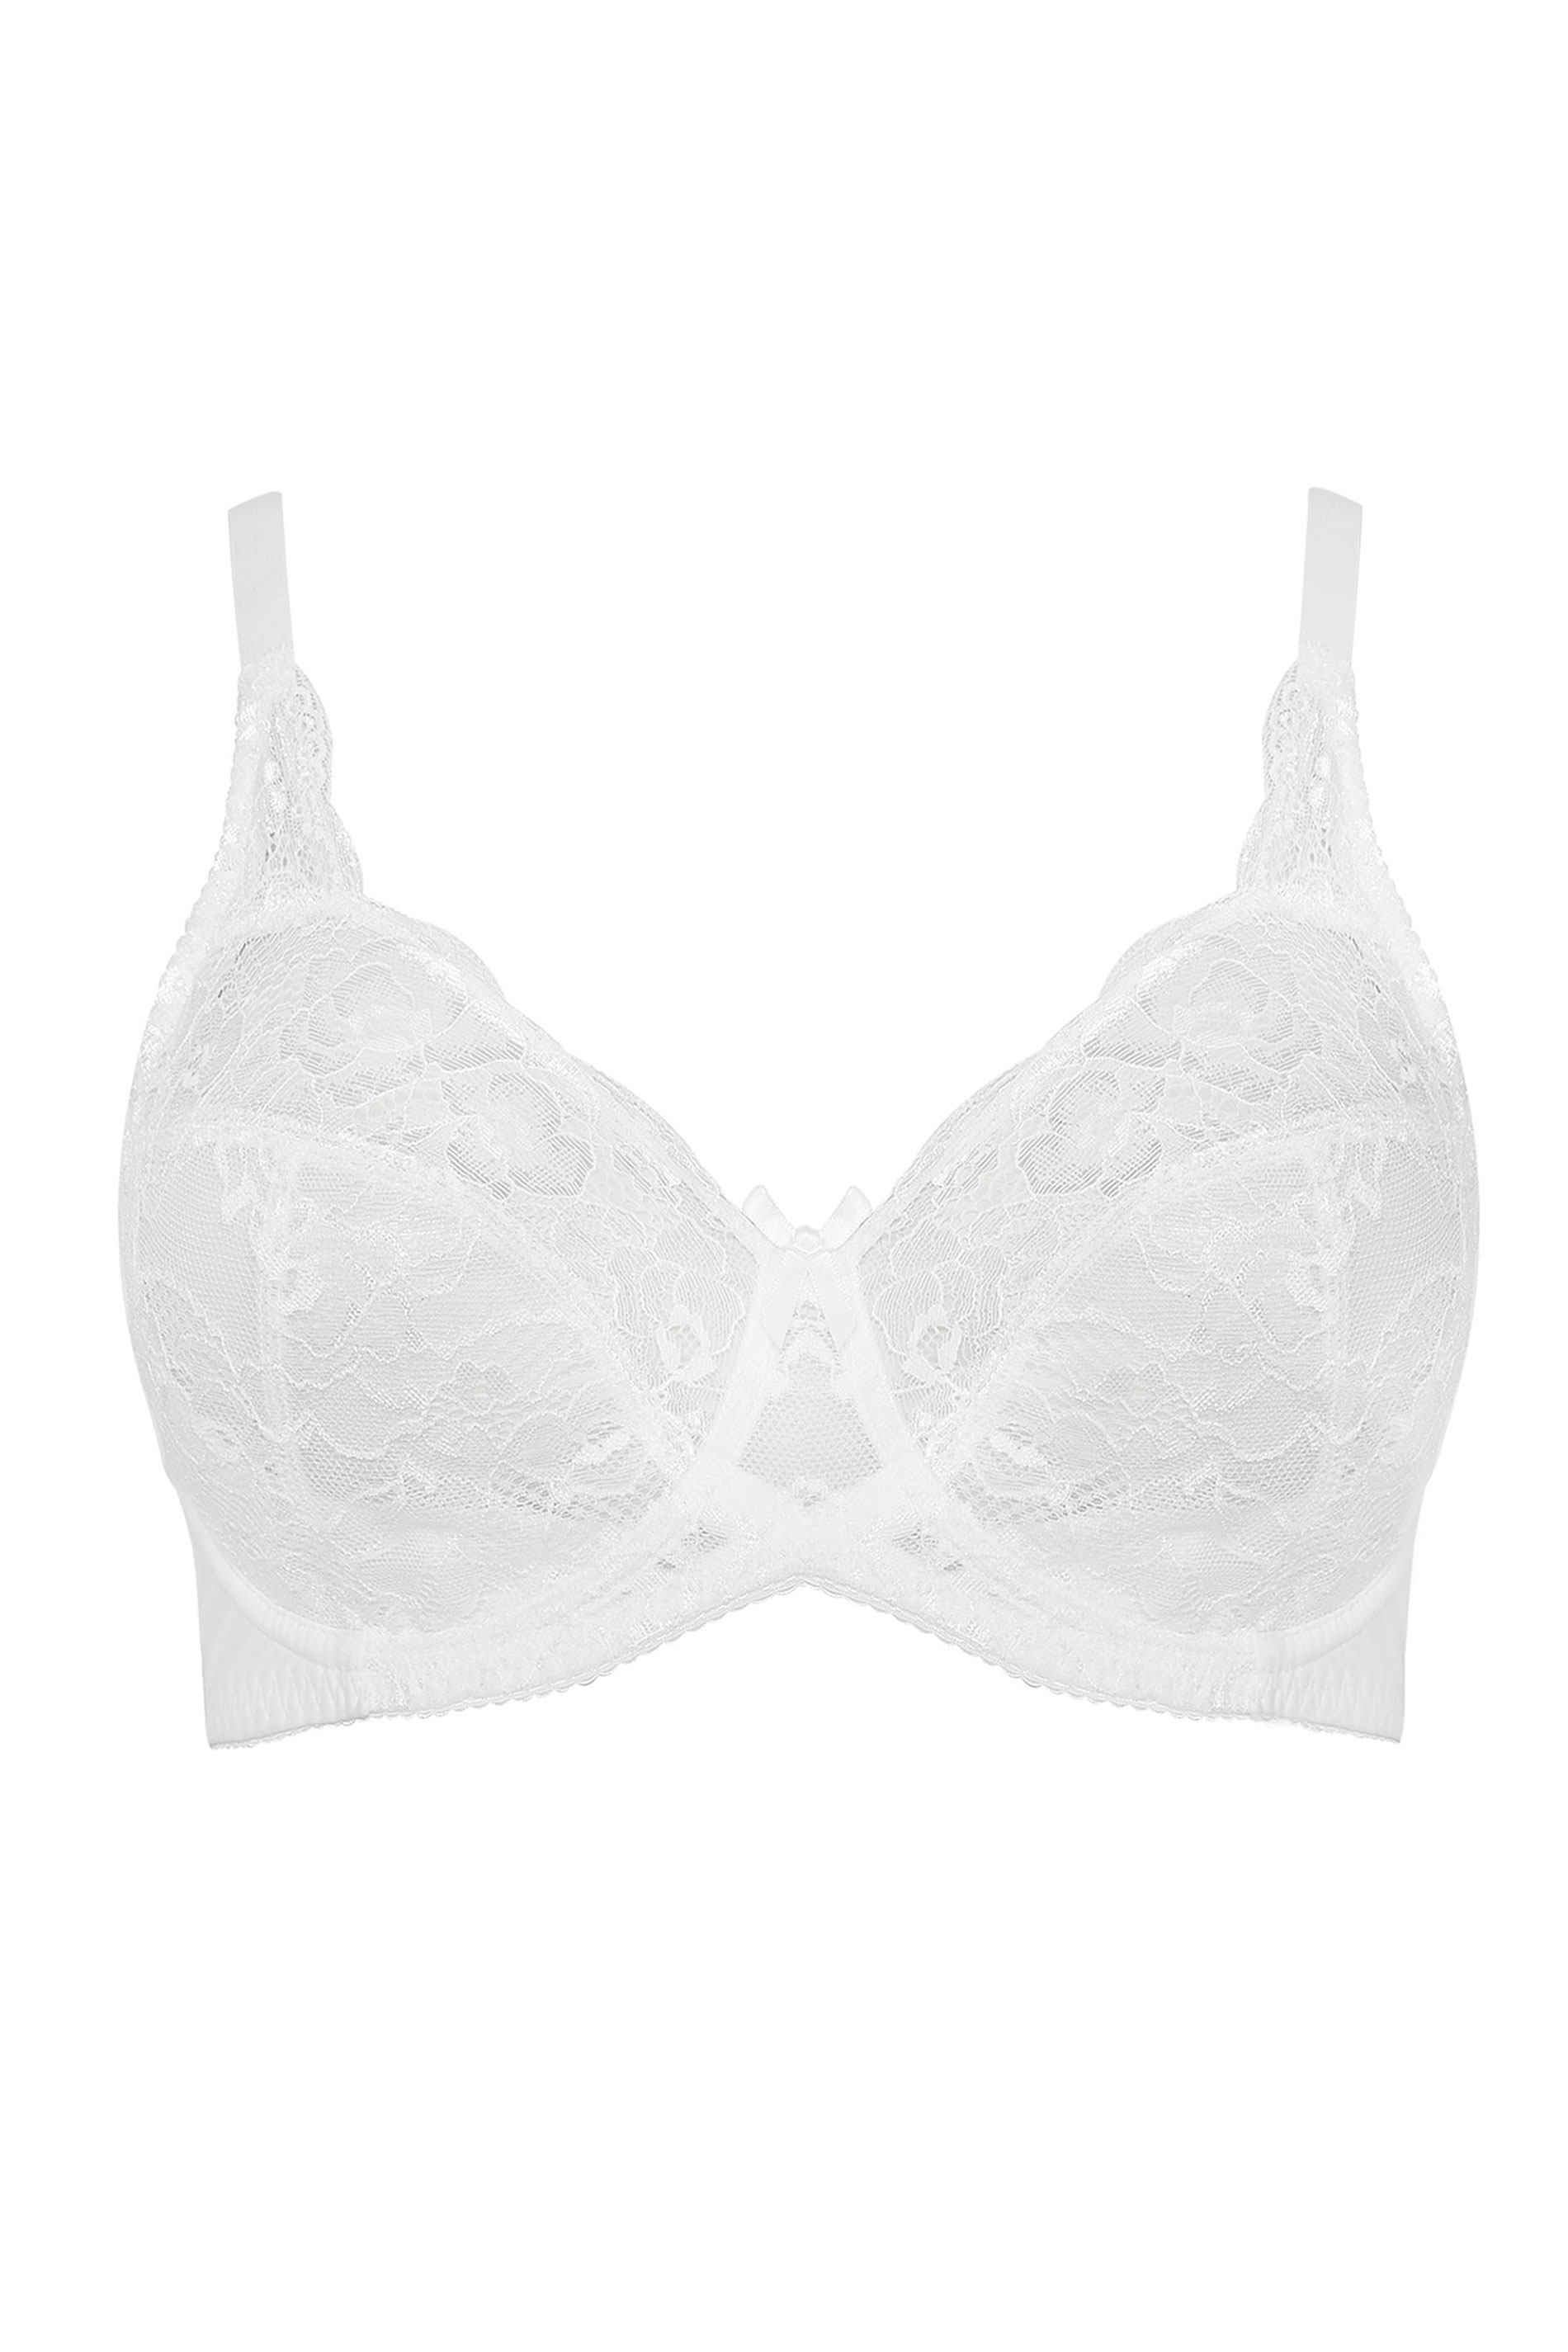 Yours Curve Womens Plus Size White Stretch Lace Underwired Bra